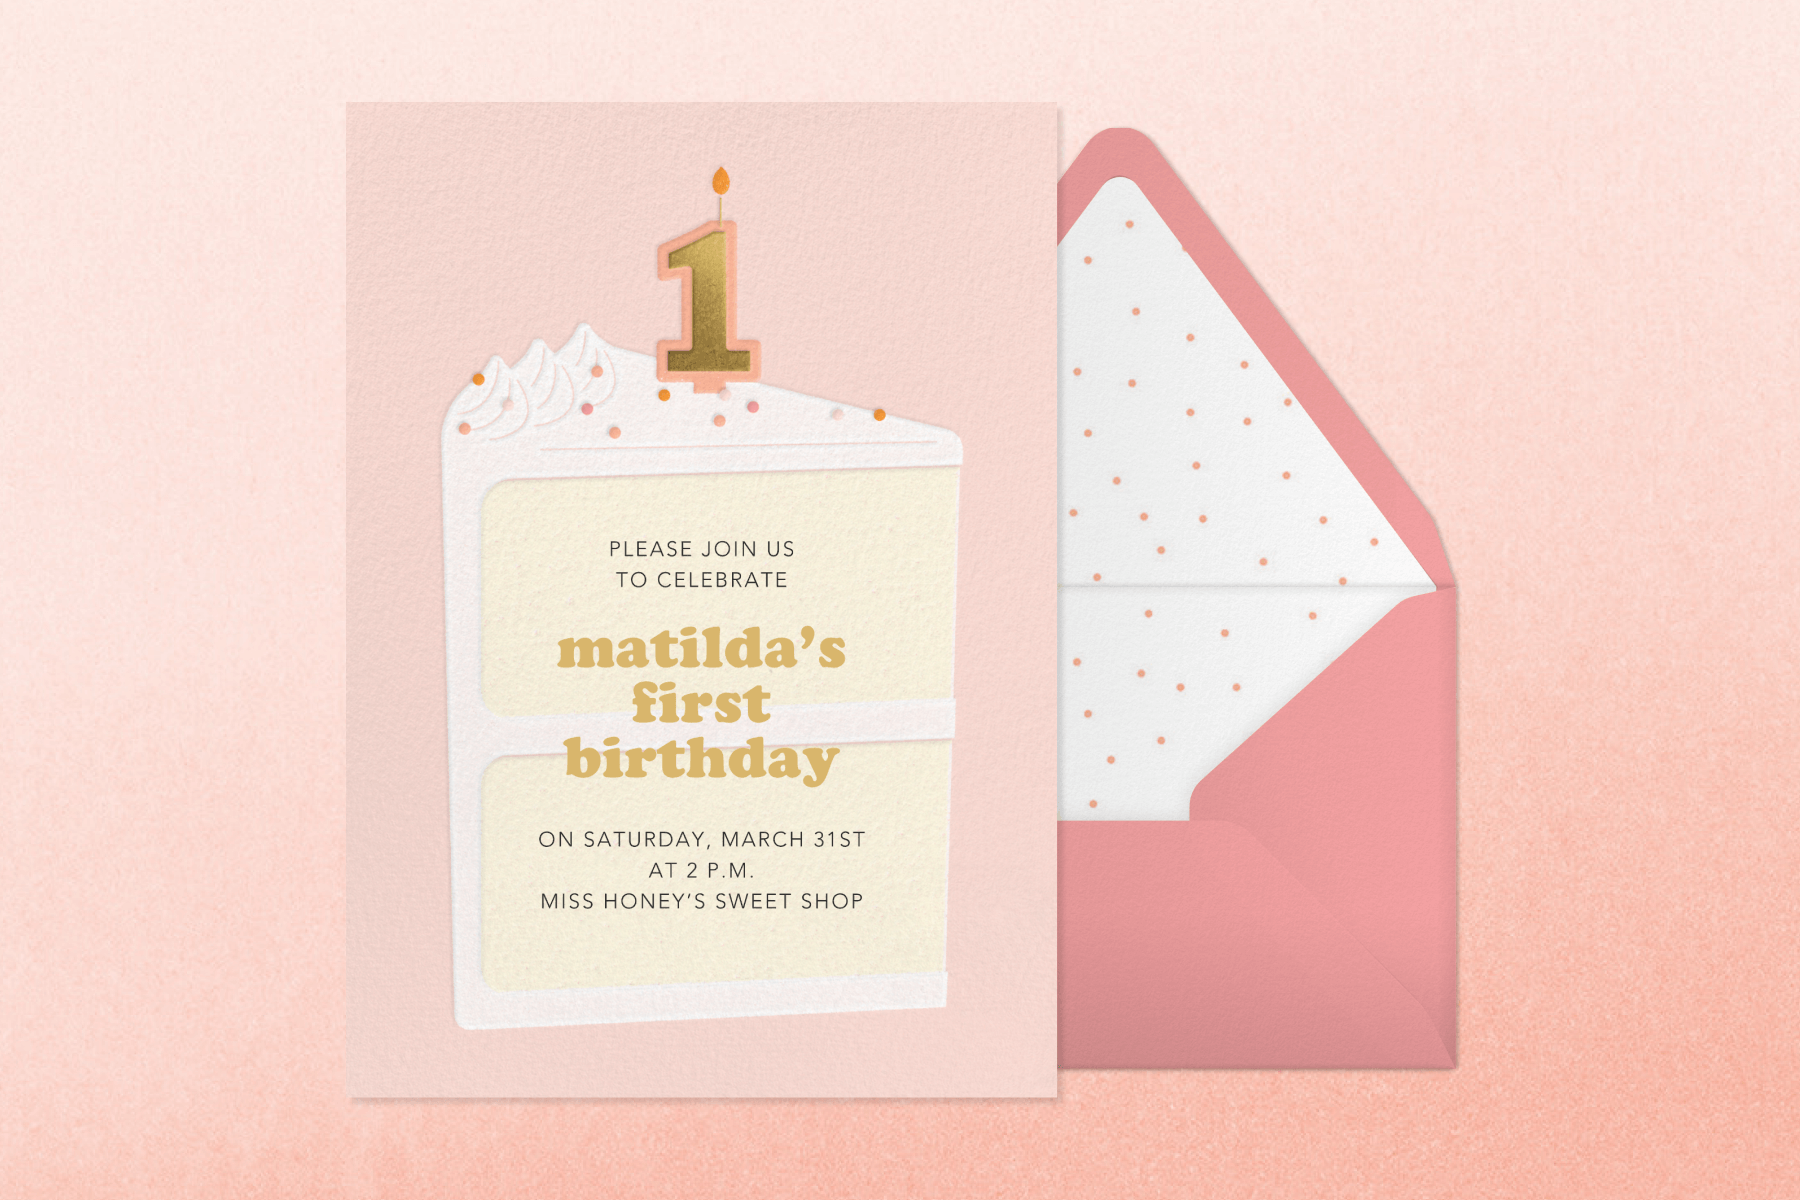 A pink birthday invitation reads “Matilda’s first birthday” with a large slice of vanilla cake and a “1” candle on top beside a pink envelope.